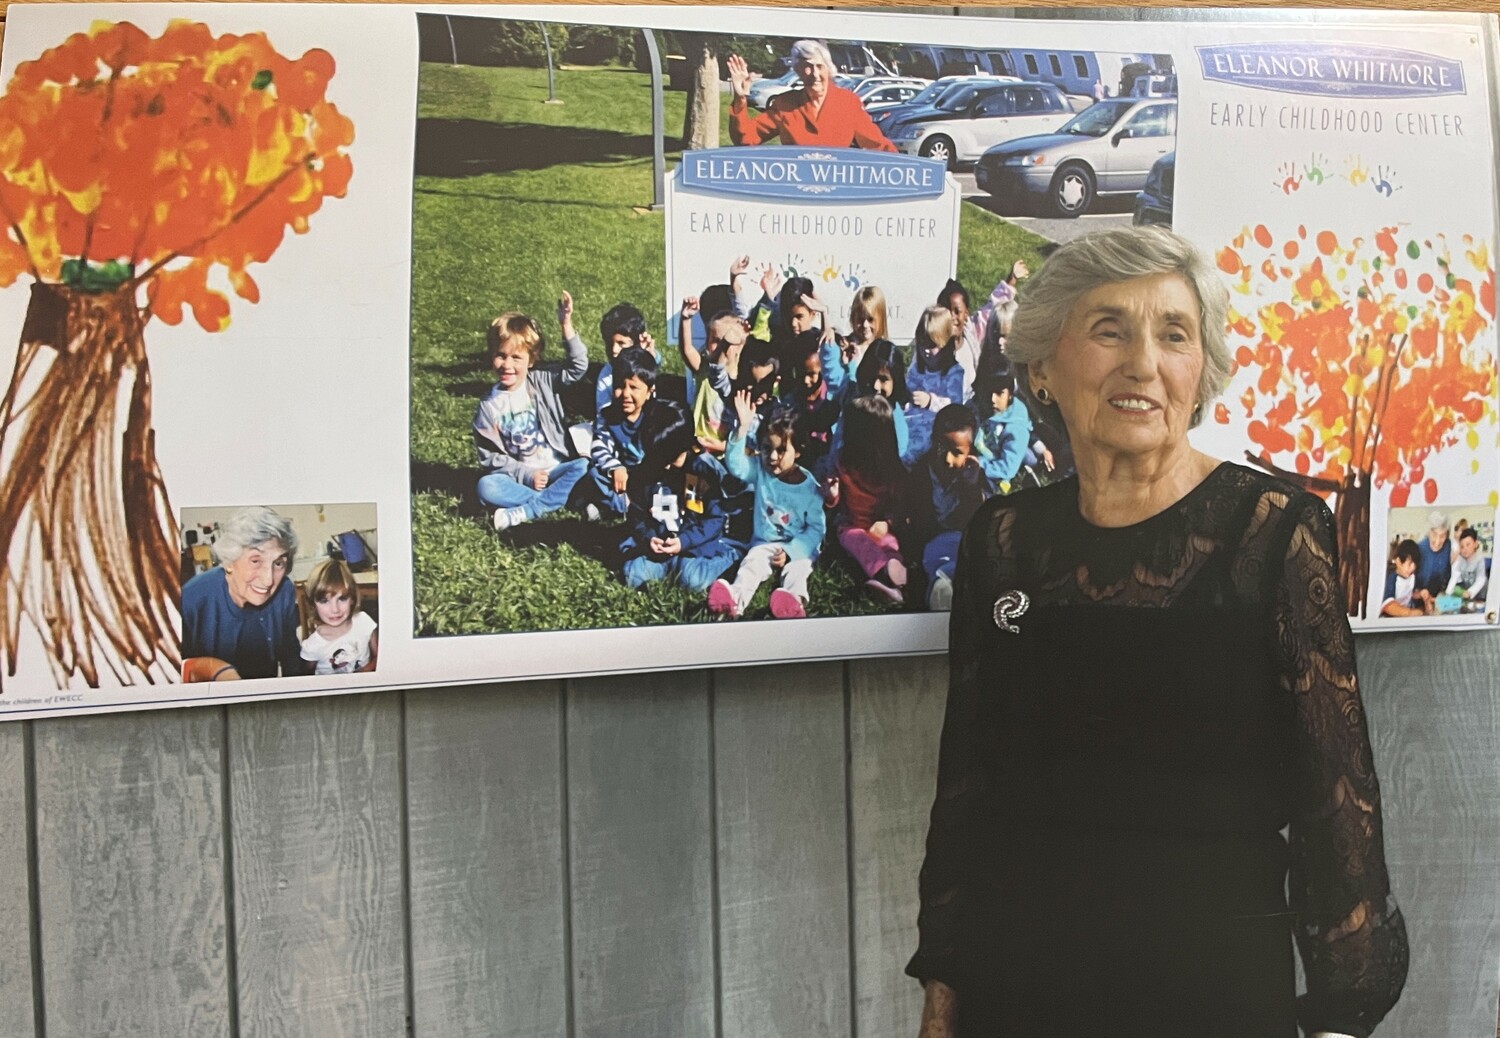 Eleanor Whitmore joined the board of the East Hampton Day Care, which later became the Eleanor Whitmore Early Childhood Center, in 1990 and was a passionate supporter of the center for decades.